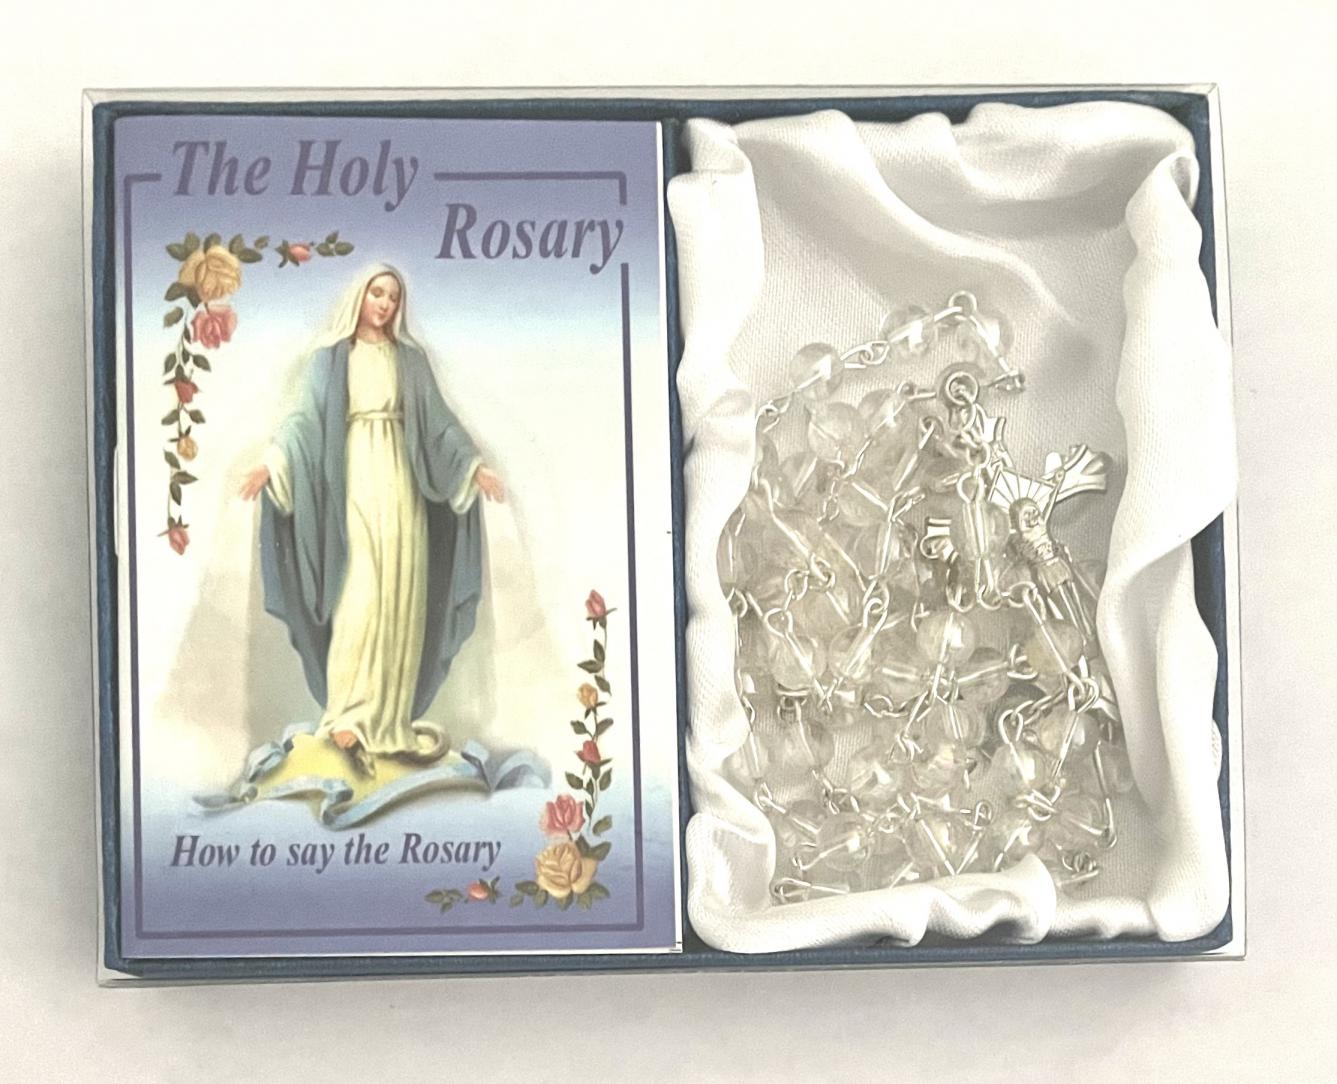 6mm Crystal Rosary with How To Say The Rosary Booklet in Blue Box